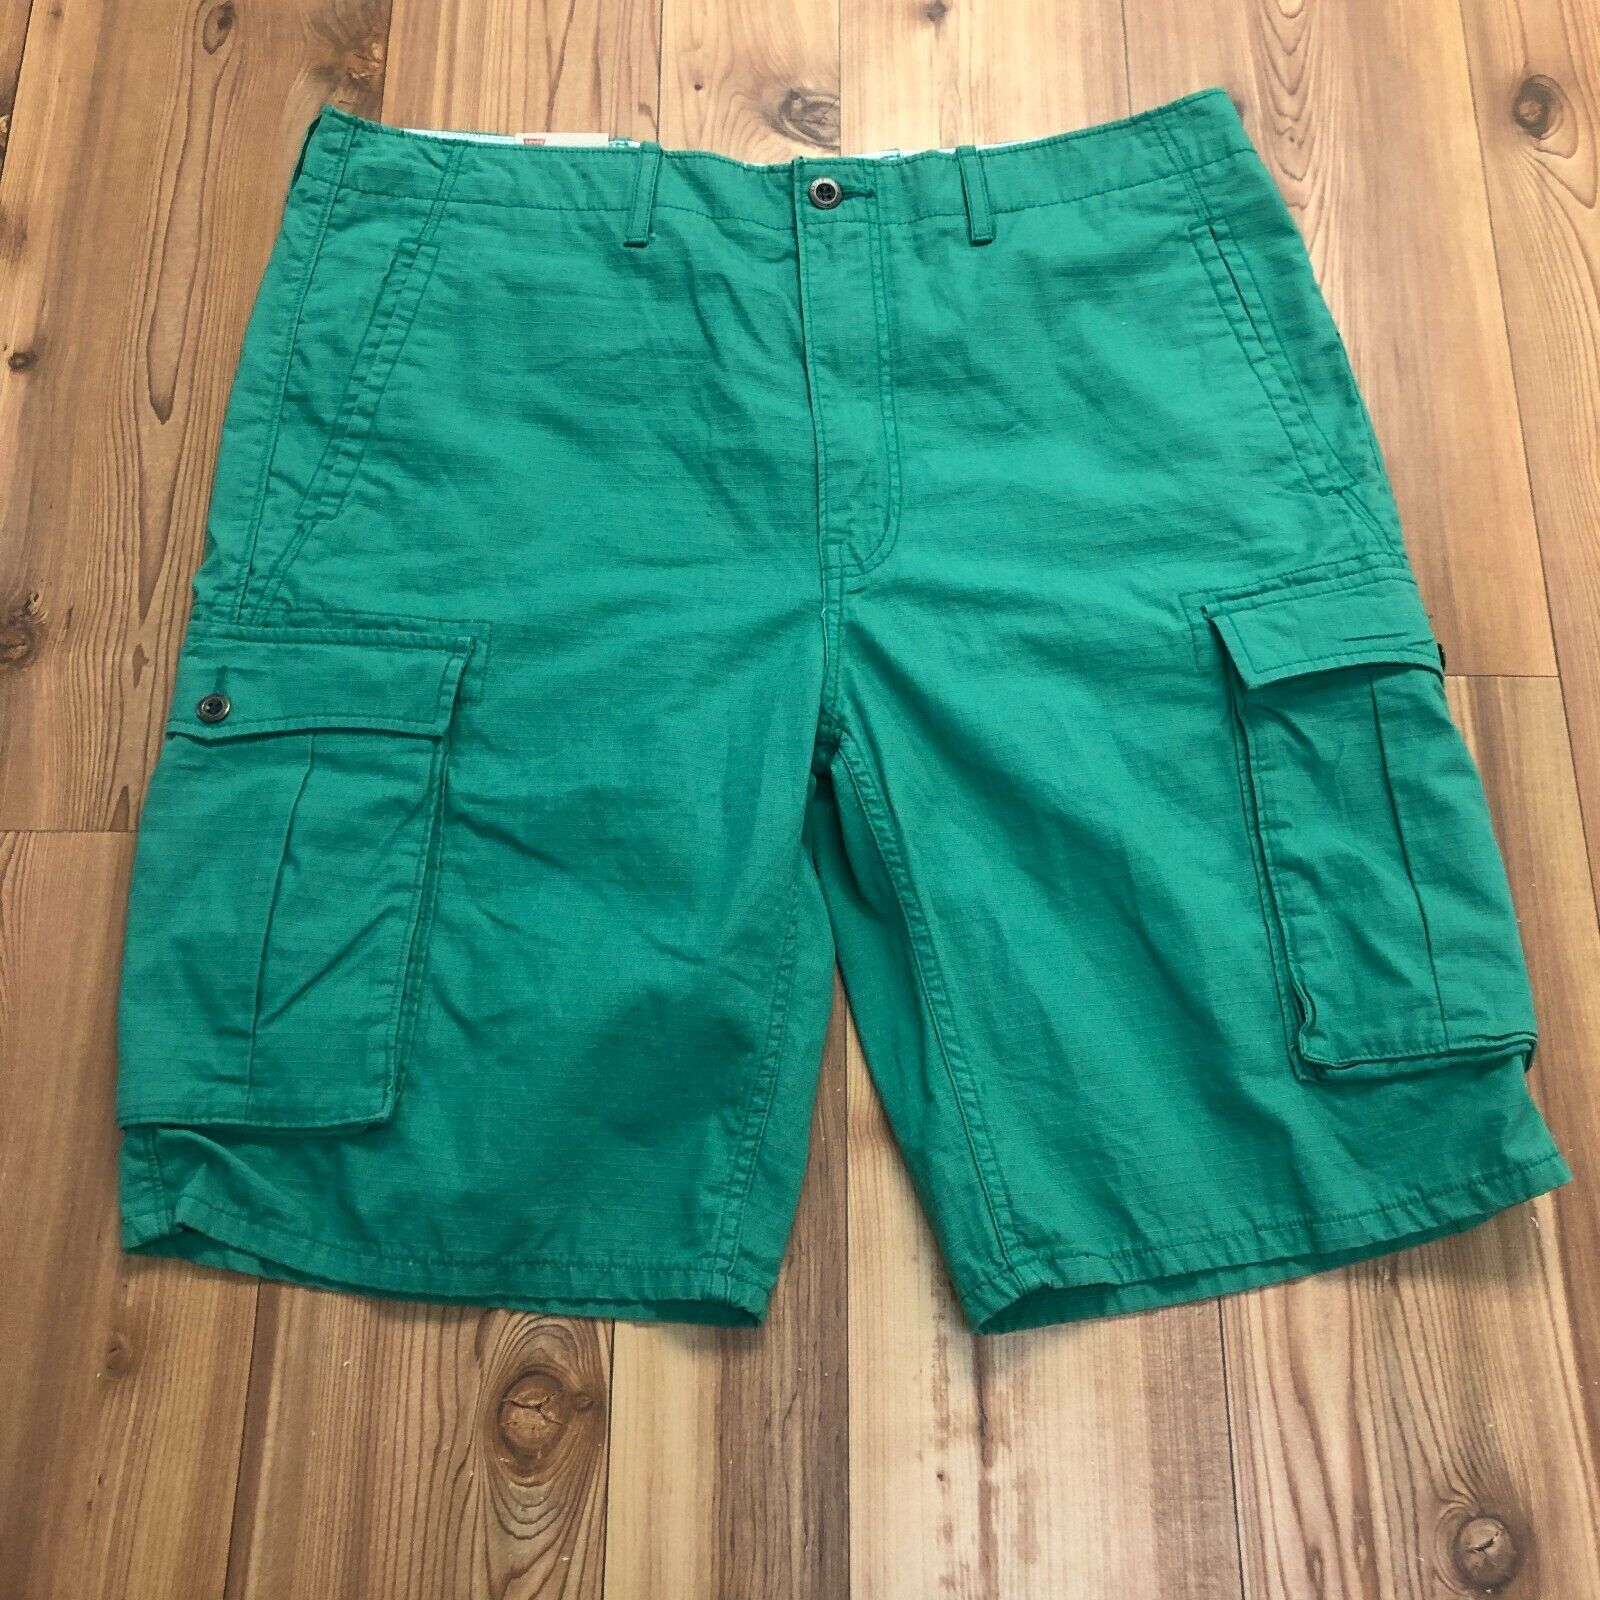 New Levi's Strauss & Co. Green Cargo Cotton Regular Fit Shorts Men's Size 38